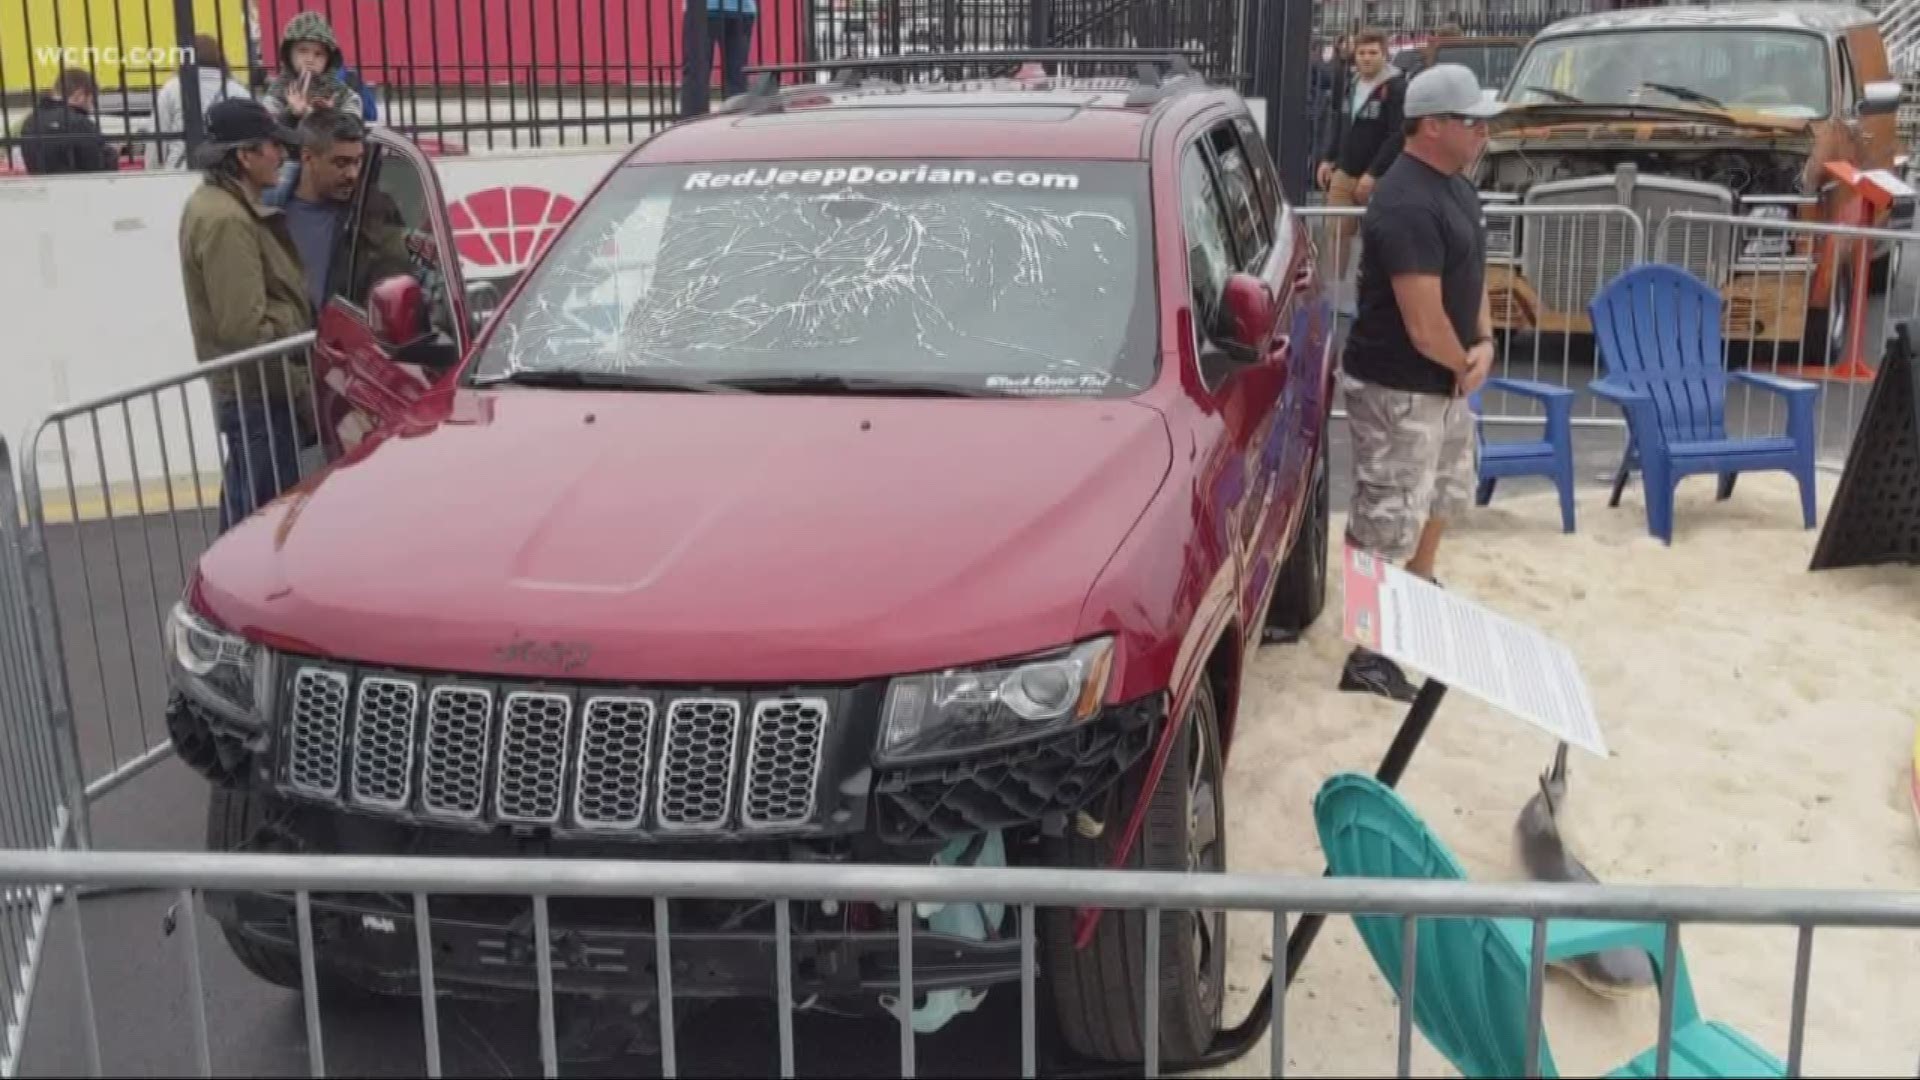 The Jeep's owners are also using their vehicle's newfound popularity to raise money for Dorian victims in the Bahamas.